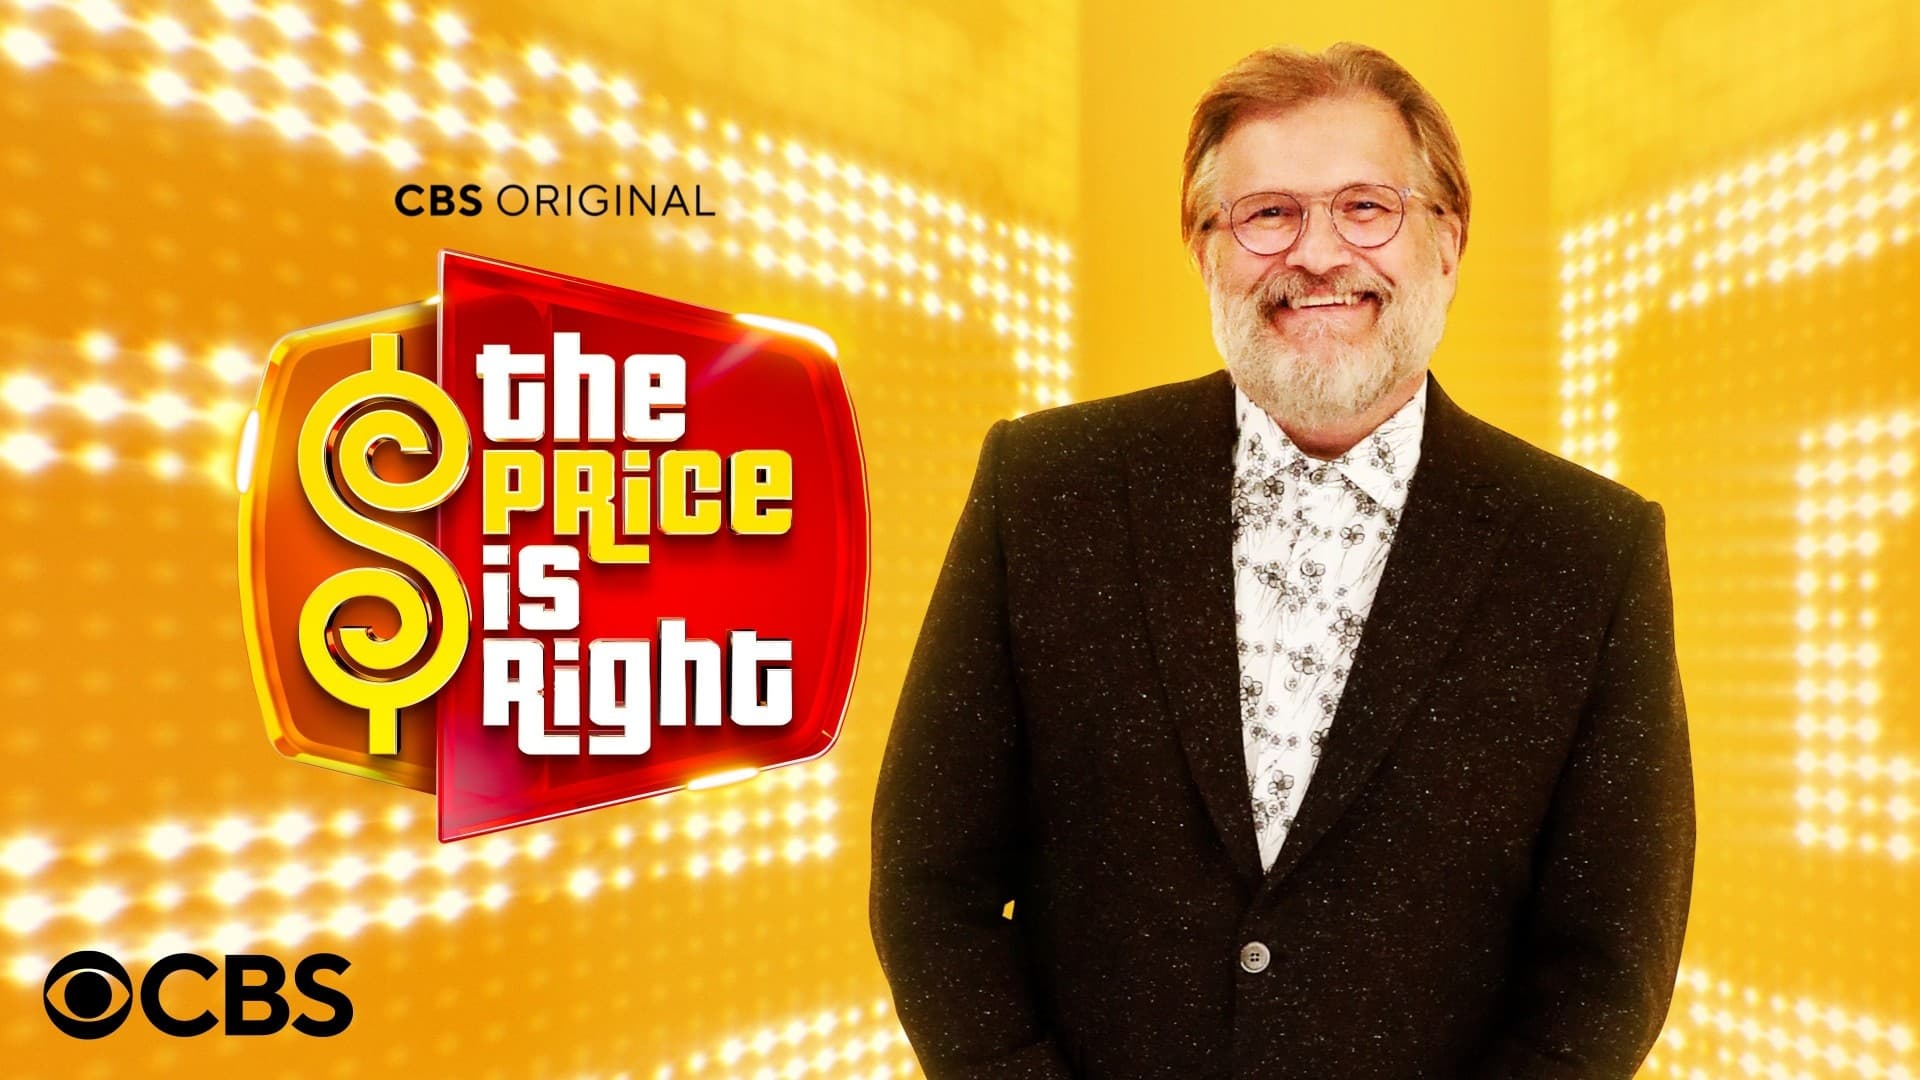 The Price Is Right - Season 5 Episode 62 : The Price Is Right Season 5 Episode 62